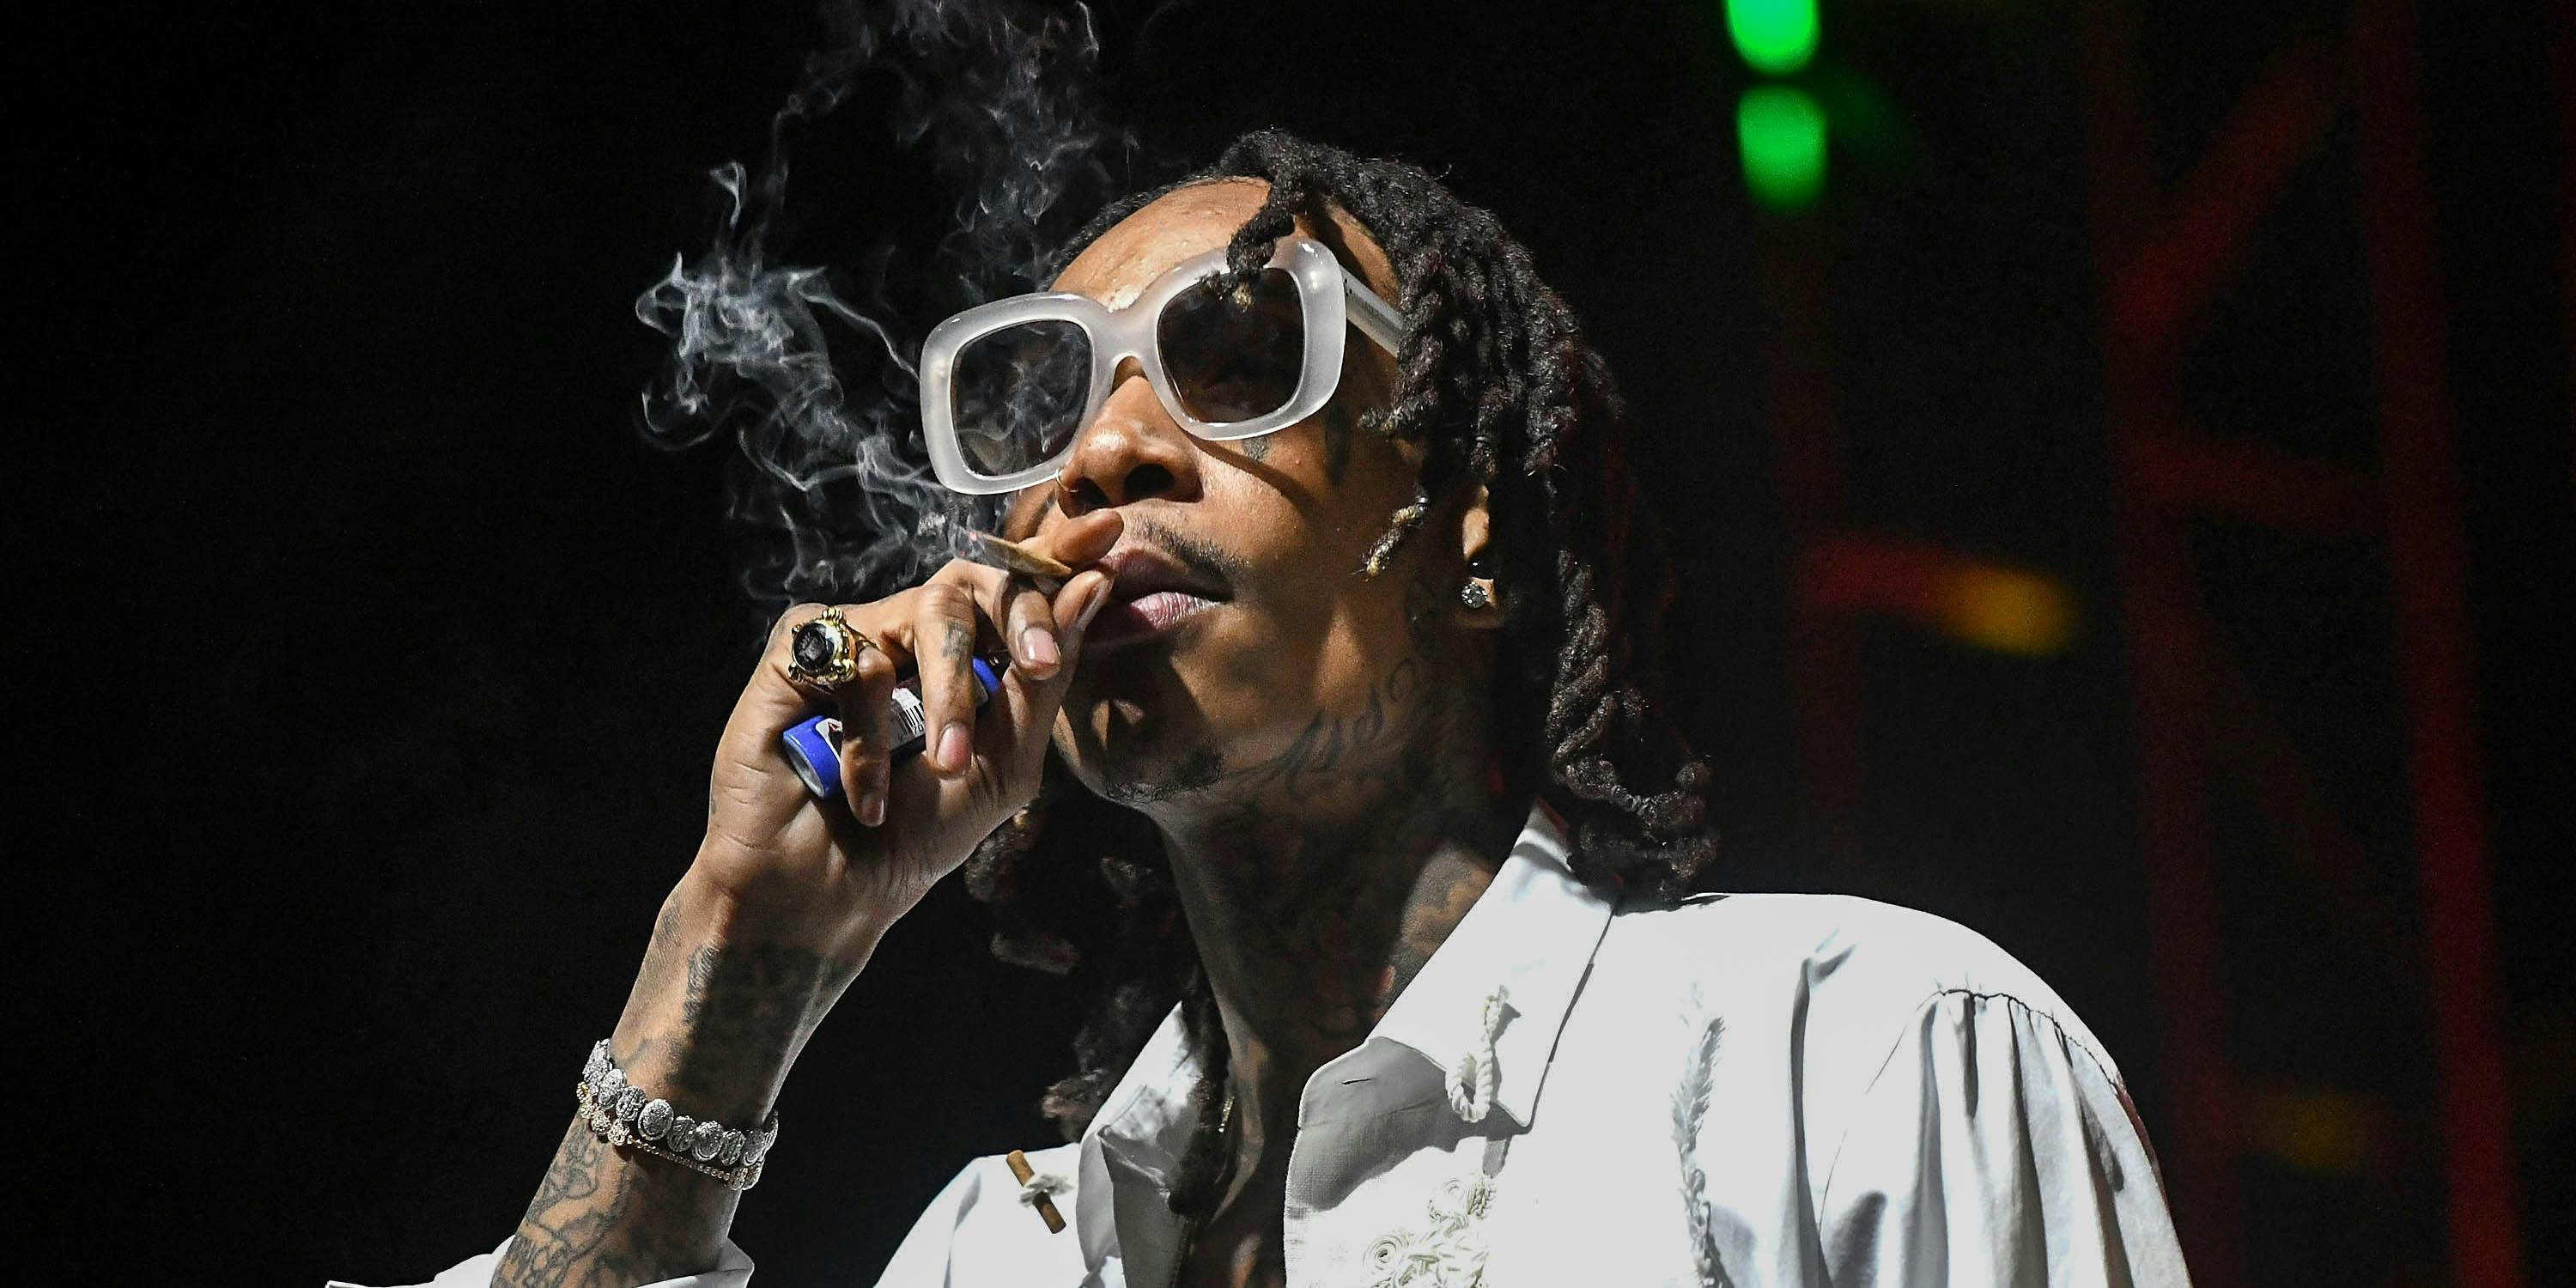 Wiz Khalifa dropped his weed tips four years ago, but do they still ring true?